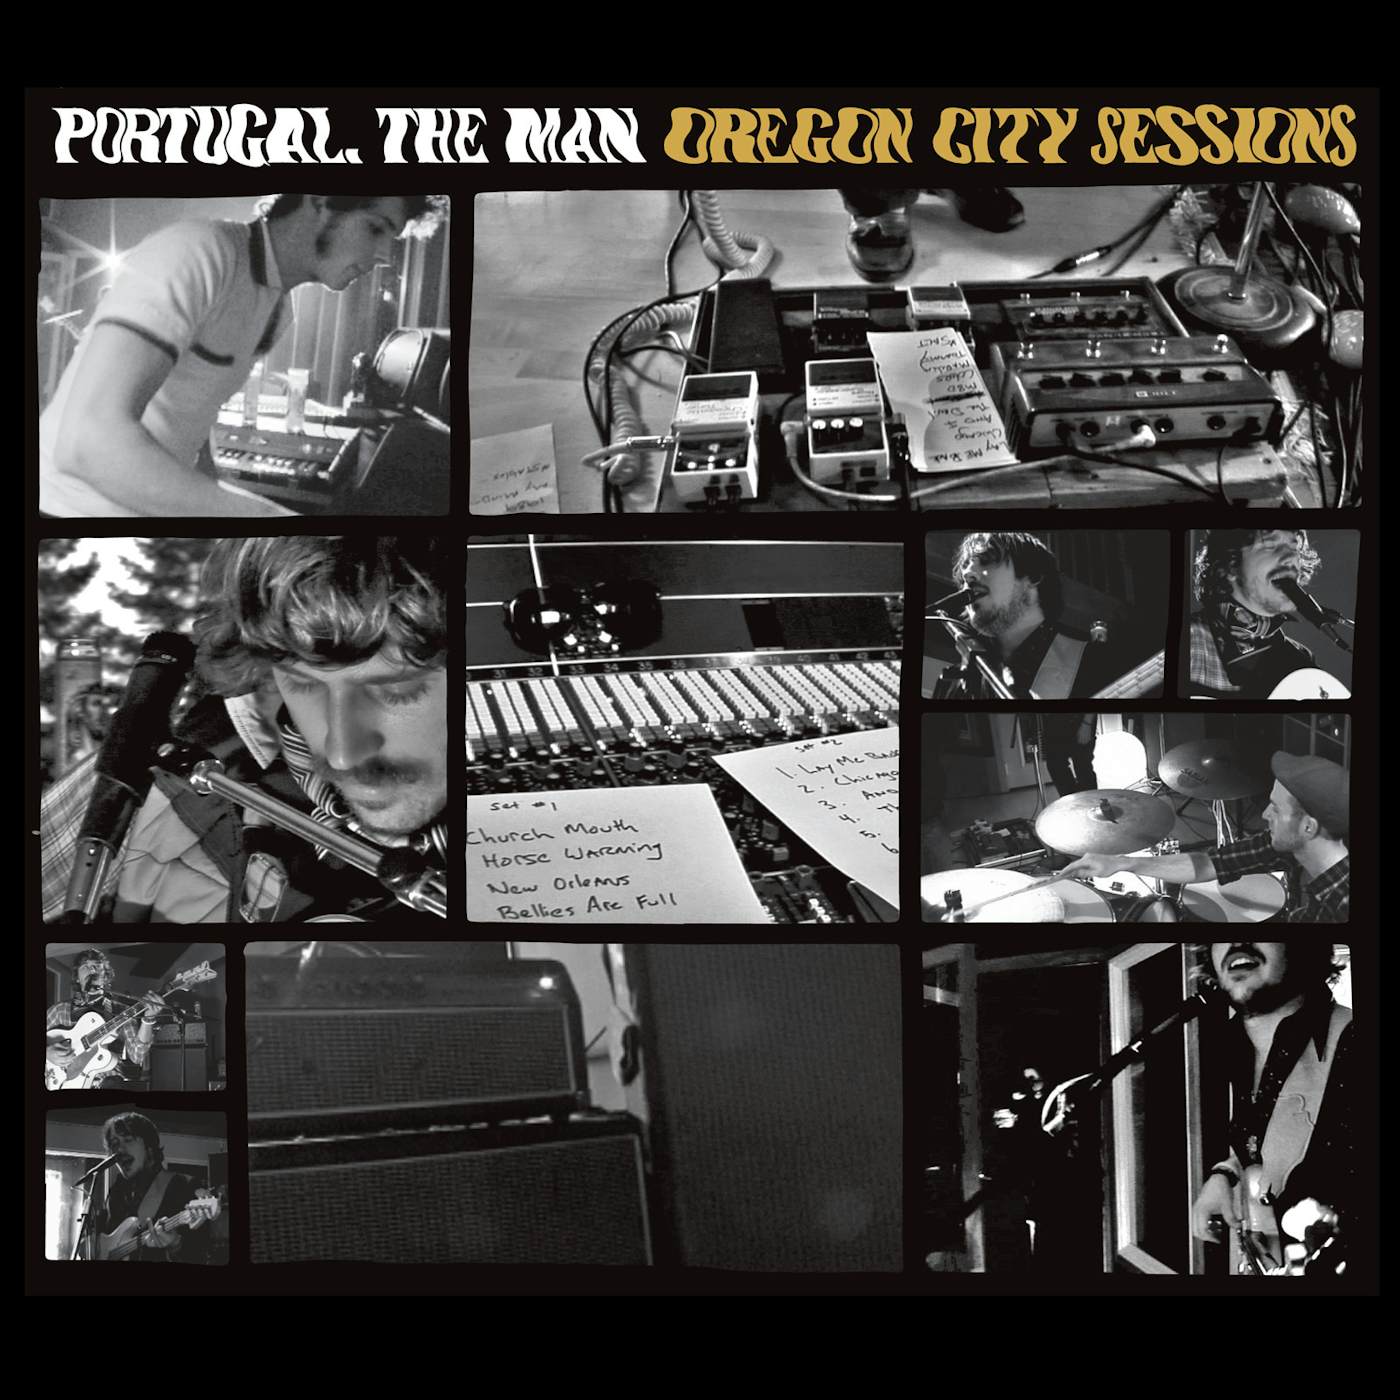 Portugal. The Man OREGON CITY SESSIONS CD